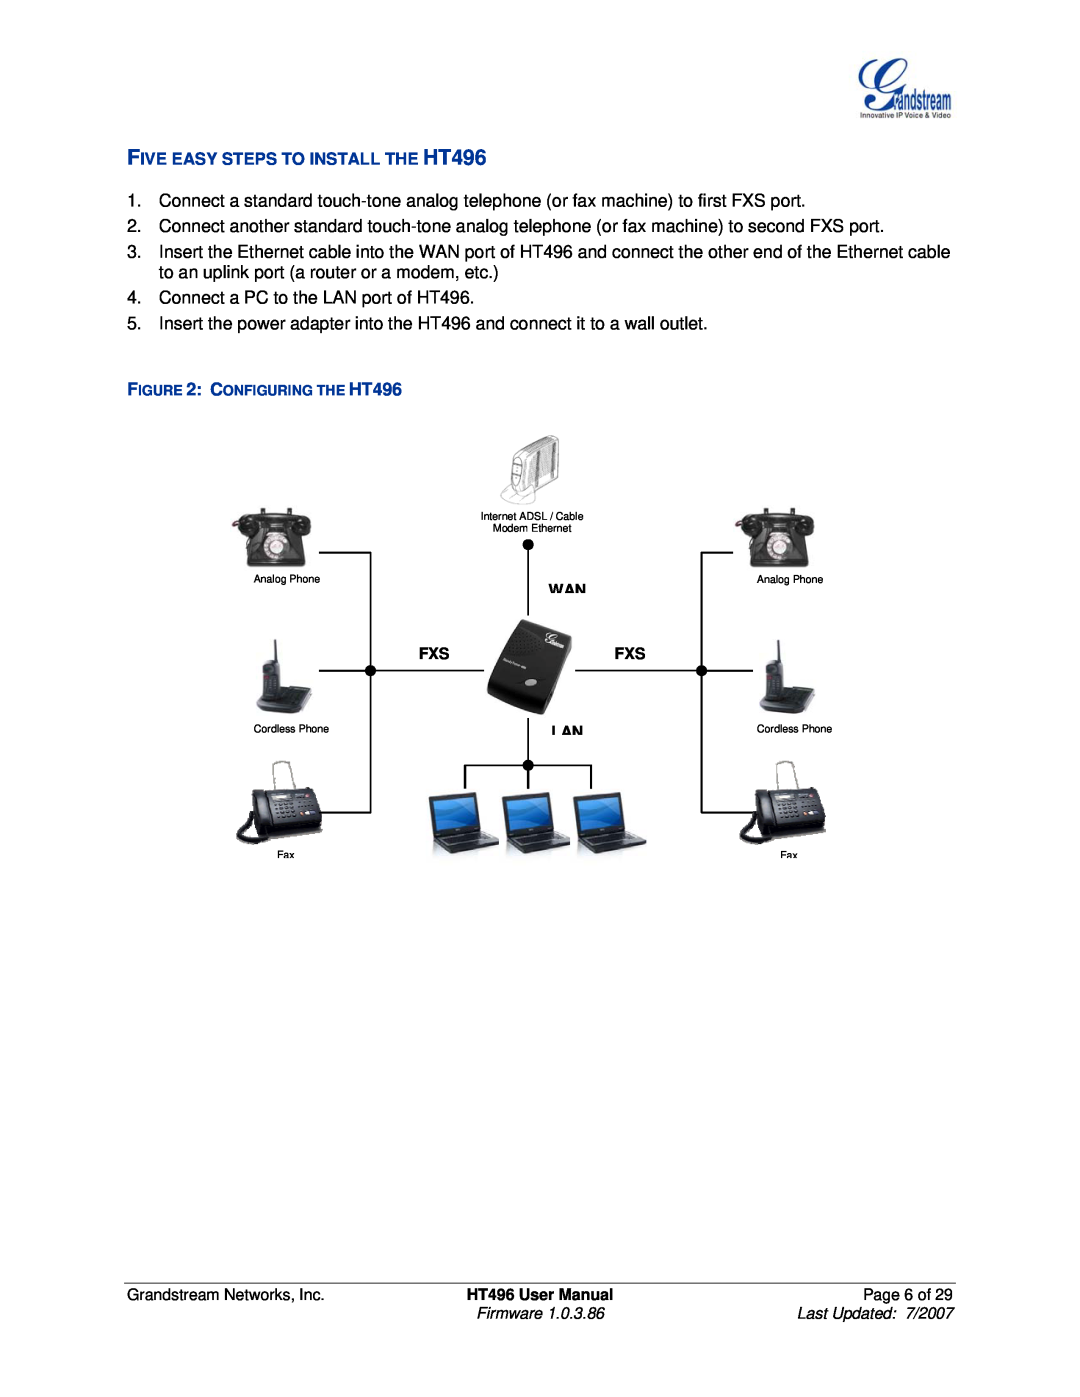 Grandstream Networks user manual FIVE EASY STEPS TO INSTALL THE HT496 